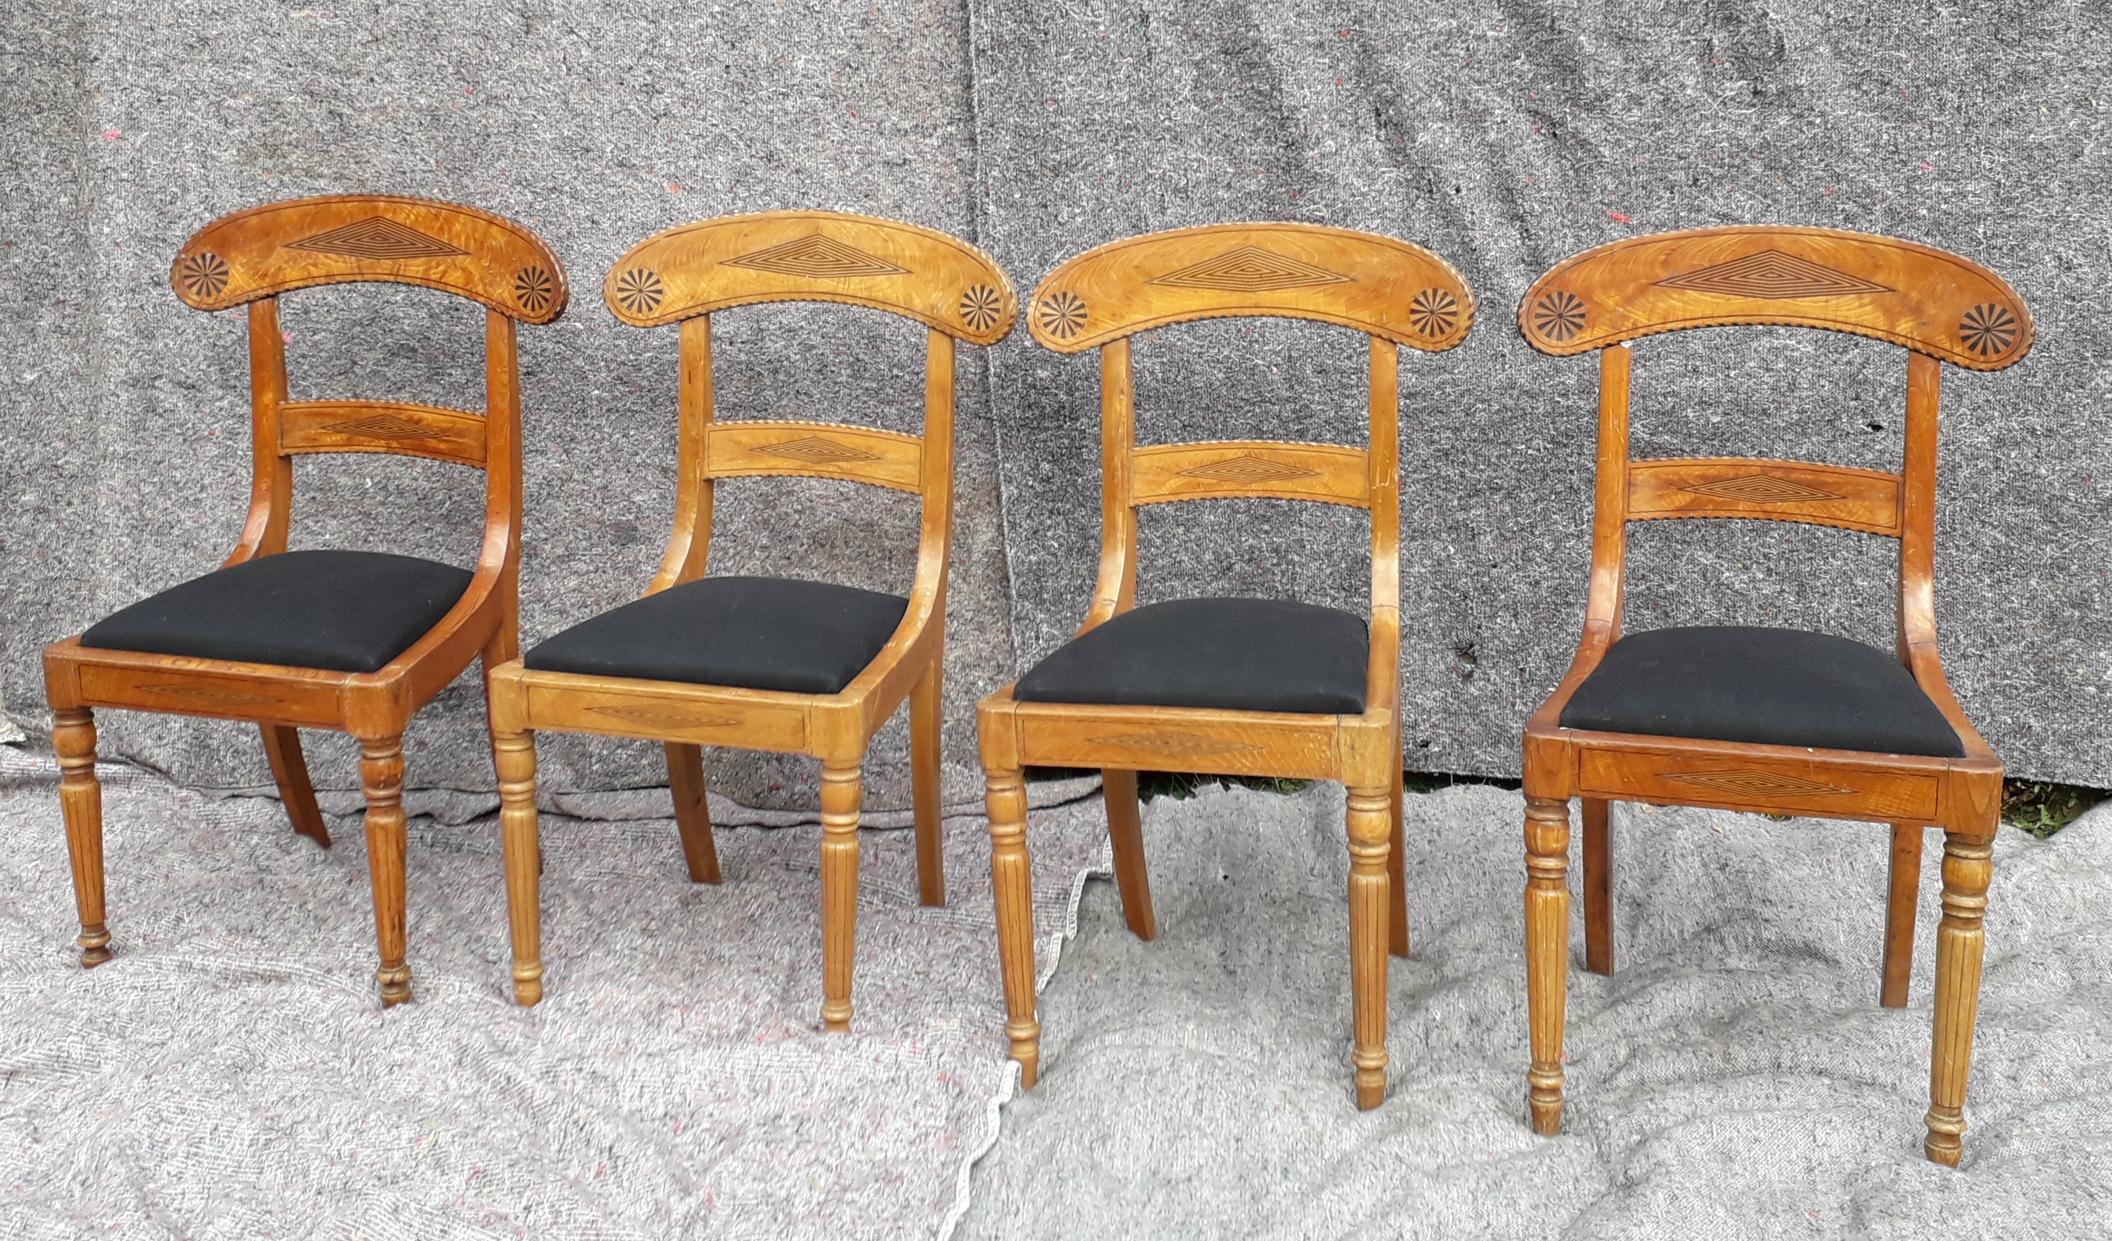 An outstanding set of four rare Swedish Biedermier chairs rarely made in Ash timber, the top rail with flamed crotch book matched veneers with beautifully set in ebony stringing carried right through the chair.